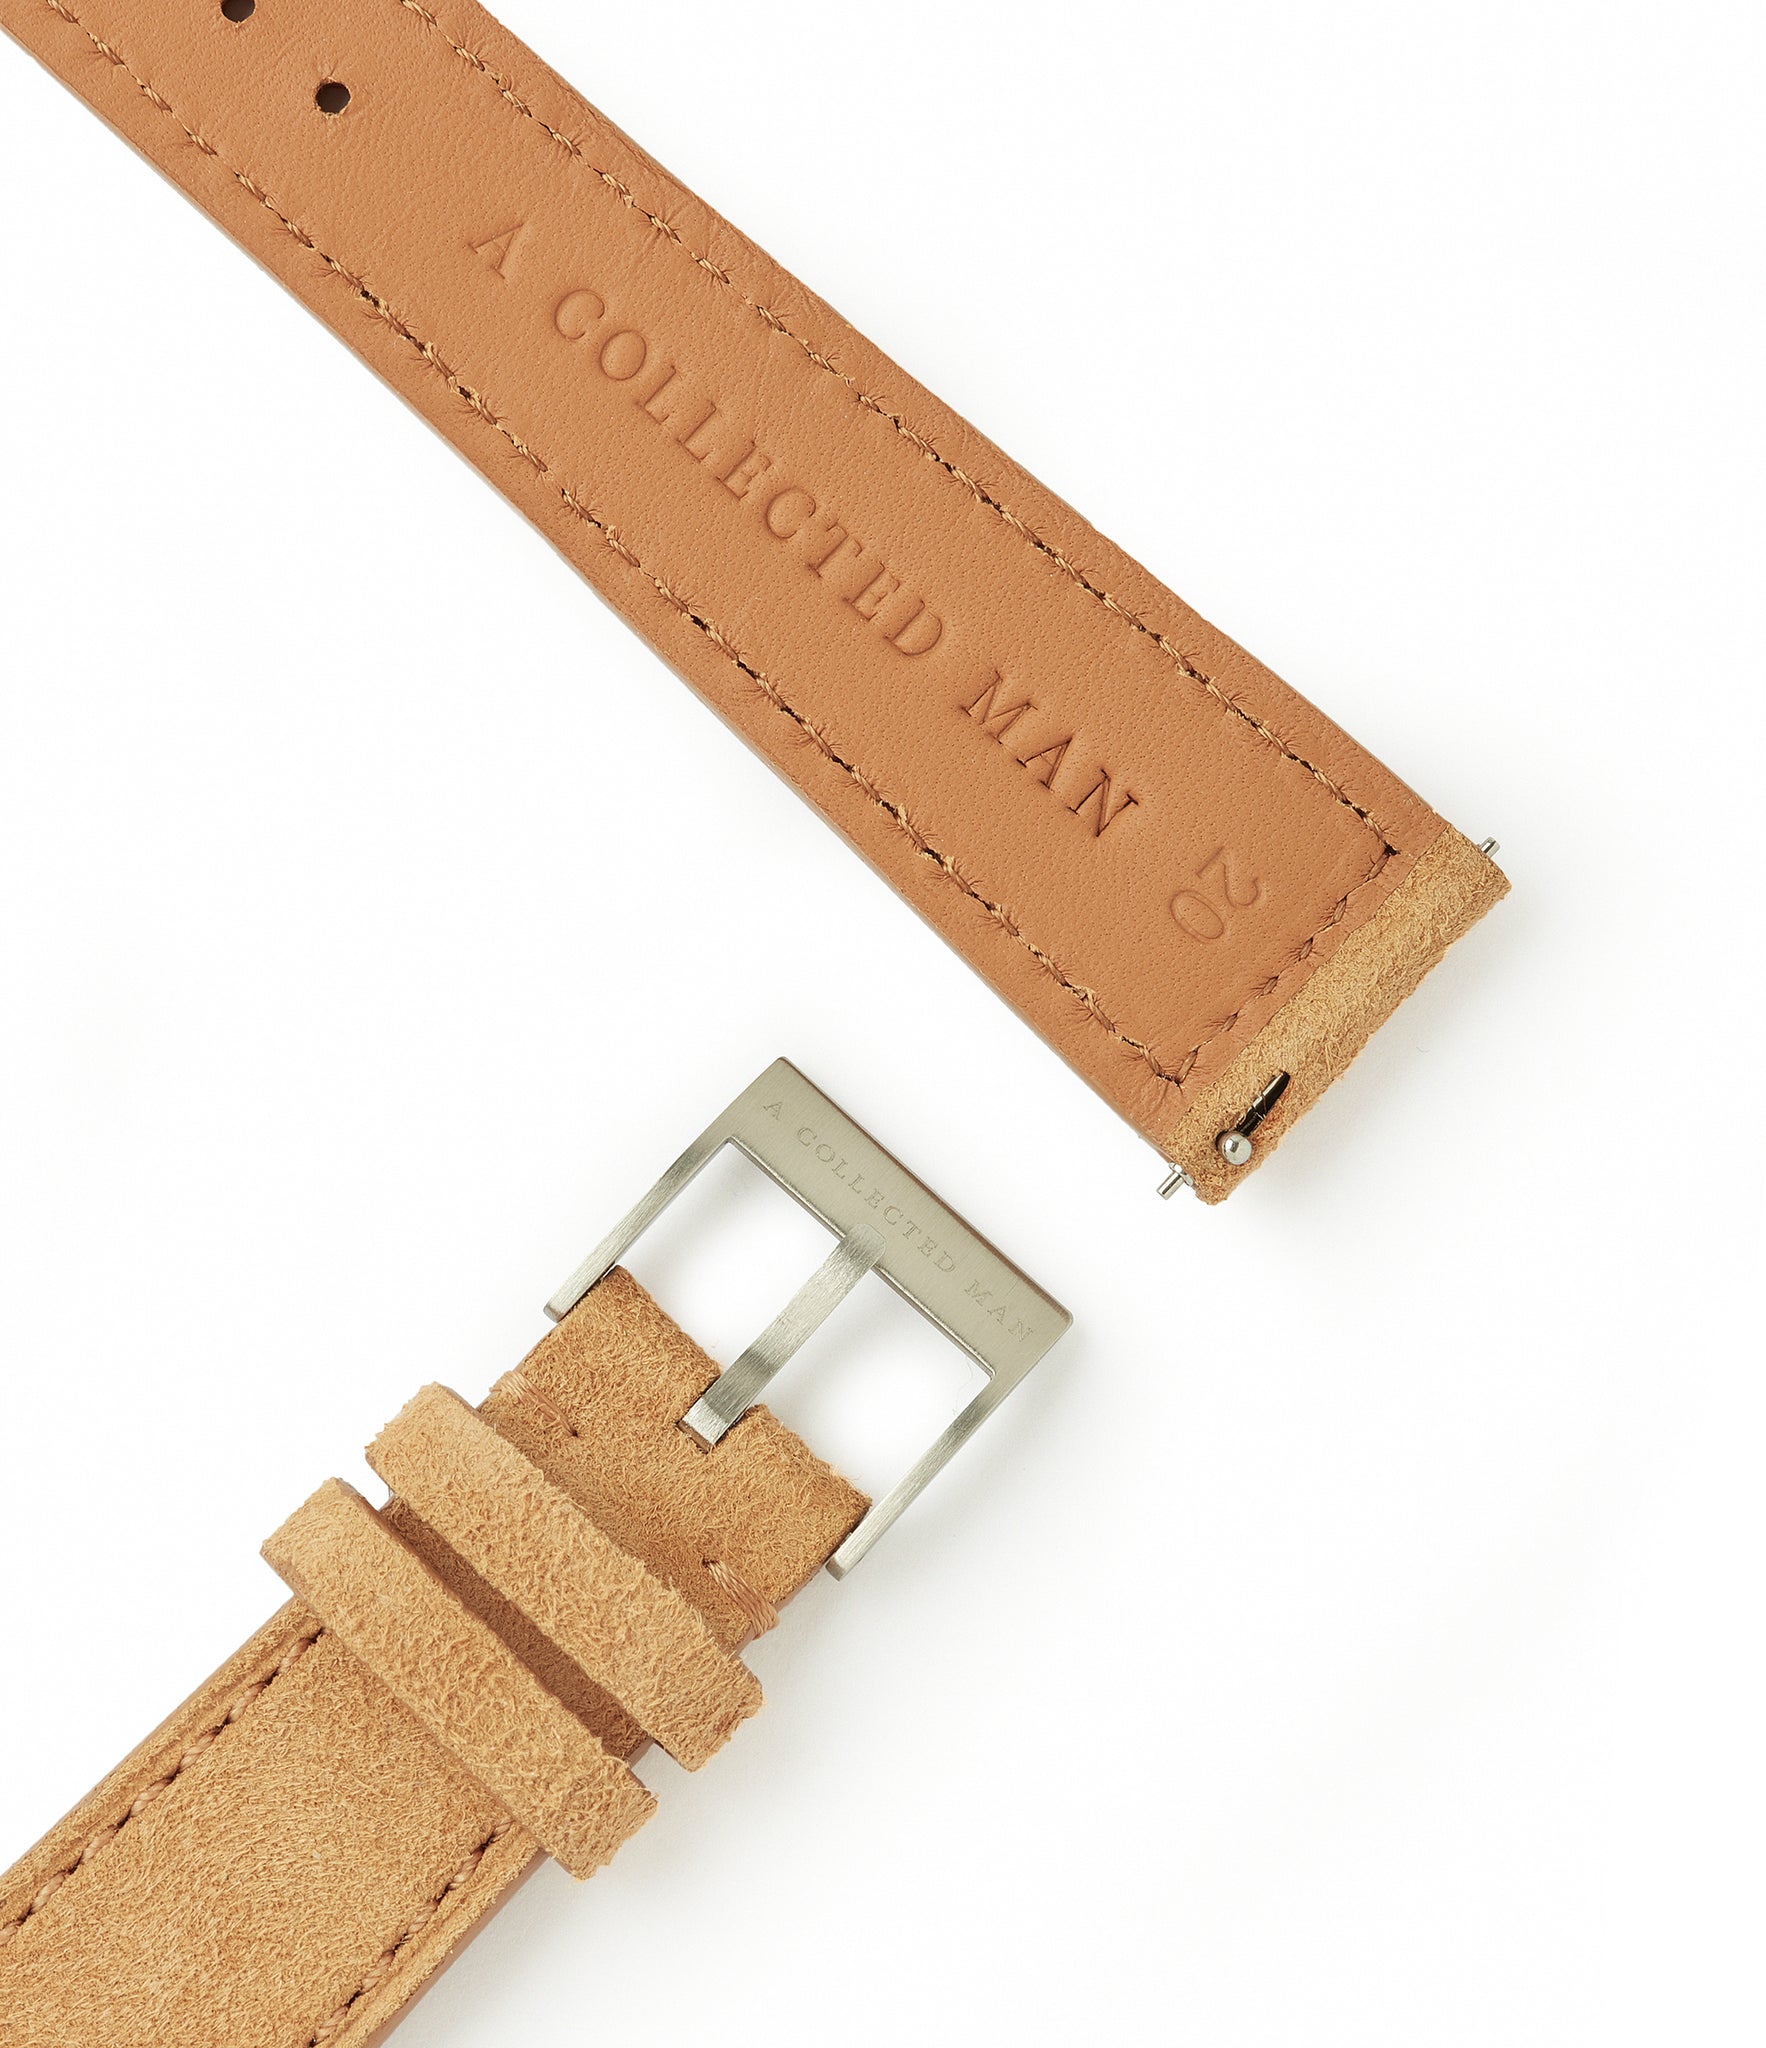 Shop Granada Molequin watch strap honey light tan suede leather quick-release springbars buckle handcrafted European-made for sale online at A Collected Man London